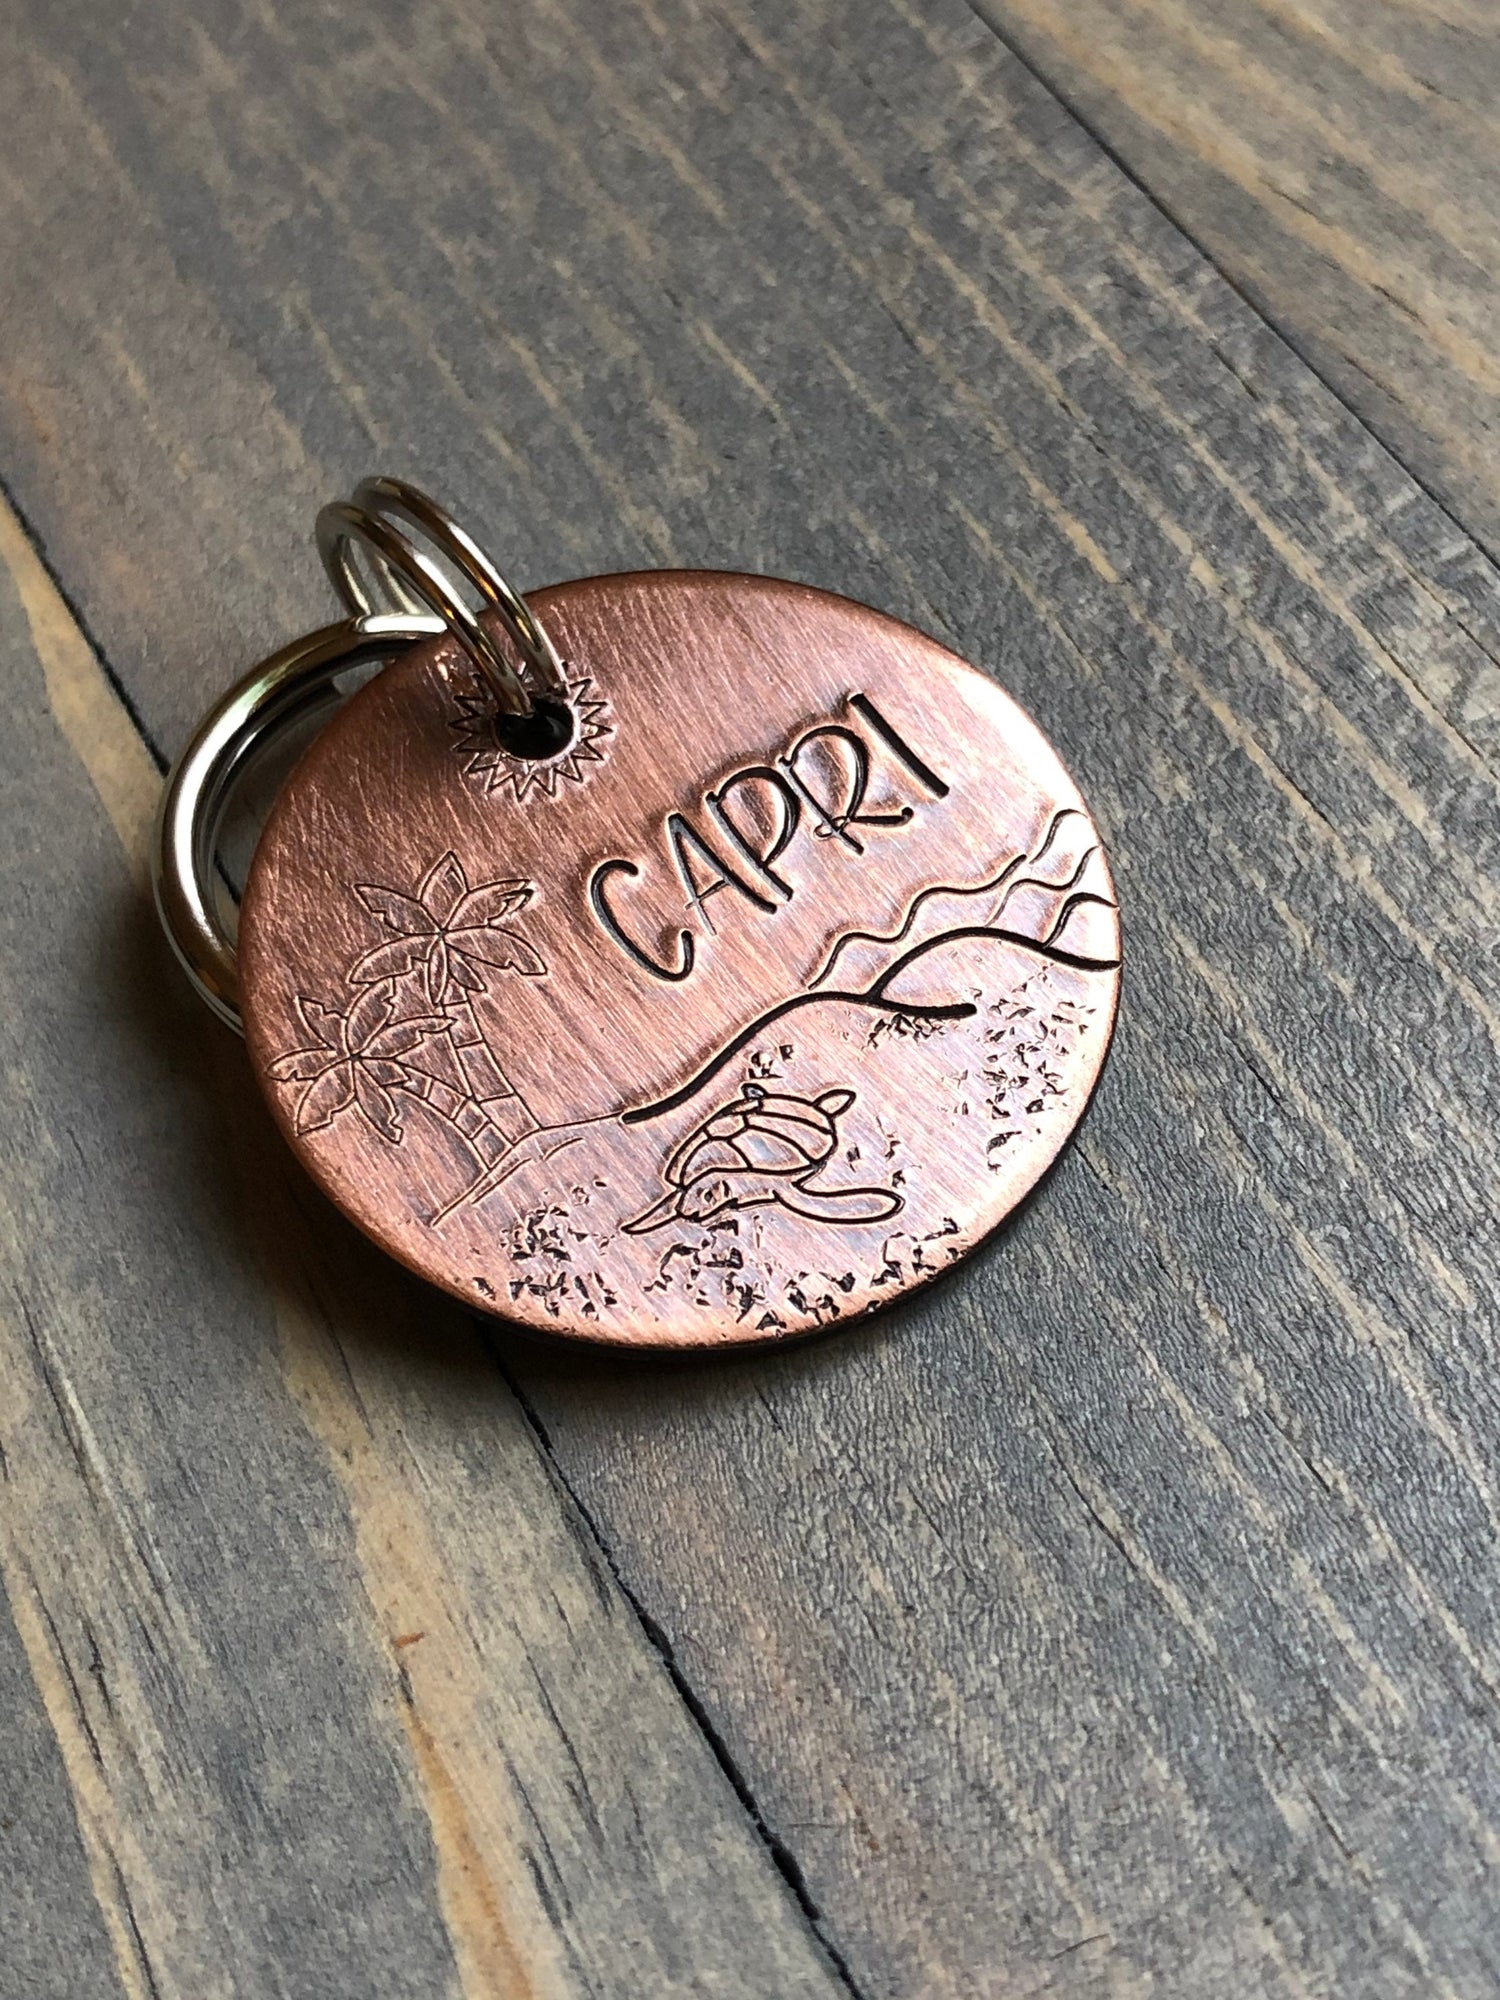 Hand Stamped Pet ID Tag, Name Tag for Dog, Coastal Beachy Dog Tag, Personalized Dog Tag for Dog, Turtle, Palm Tree, Beach